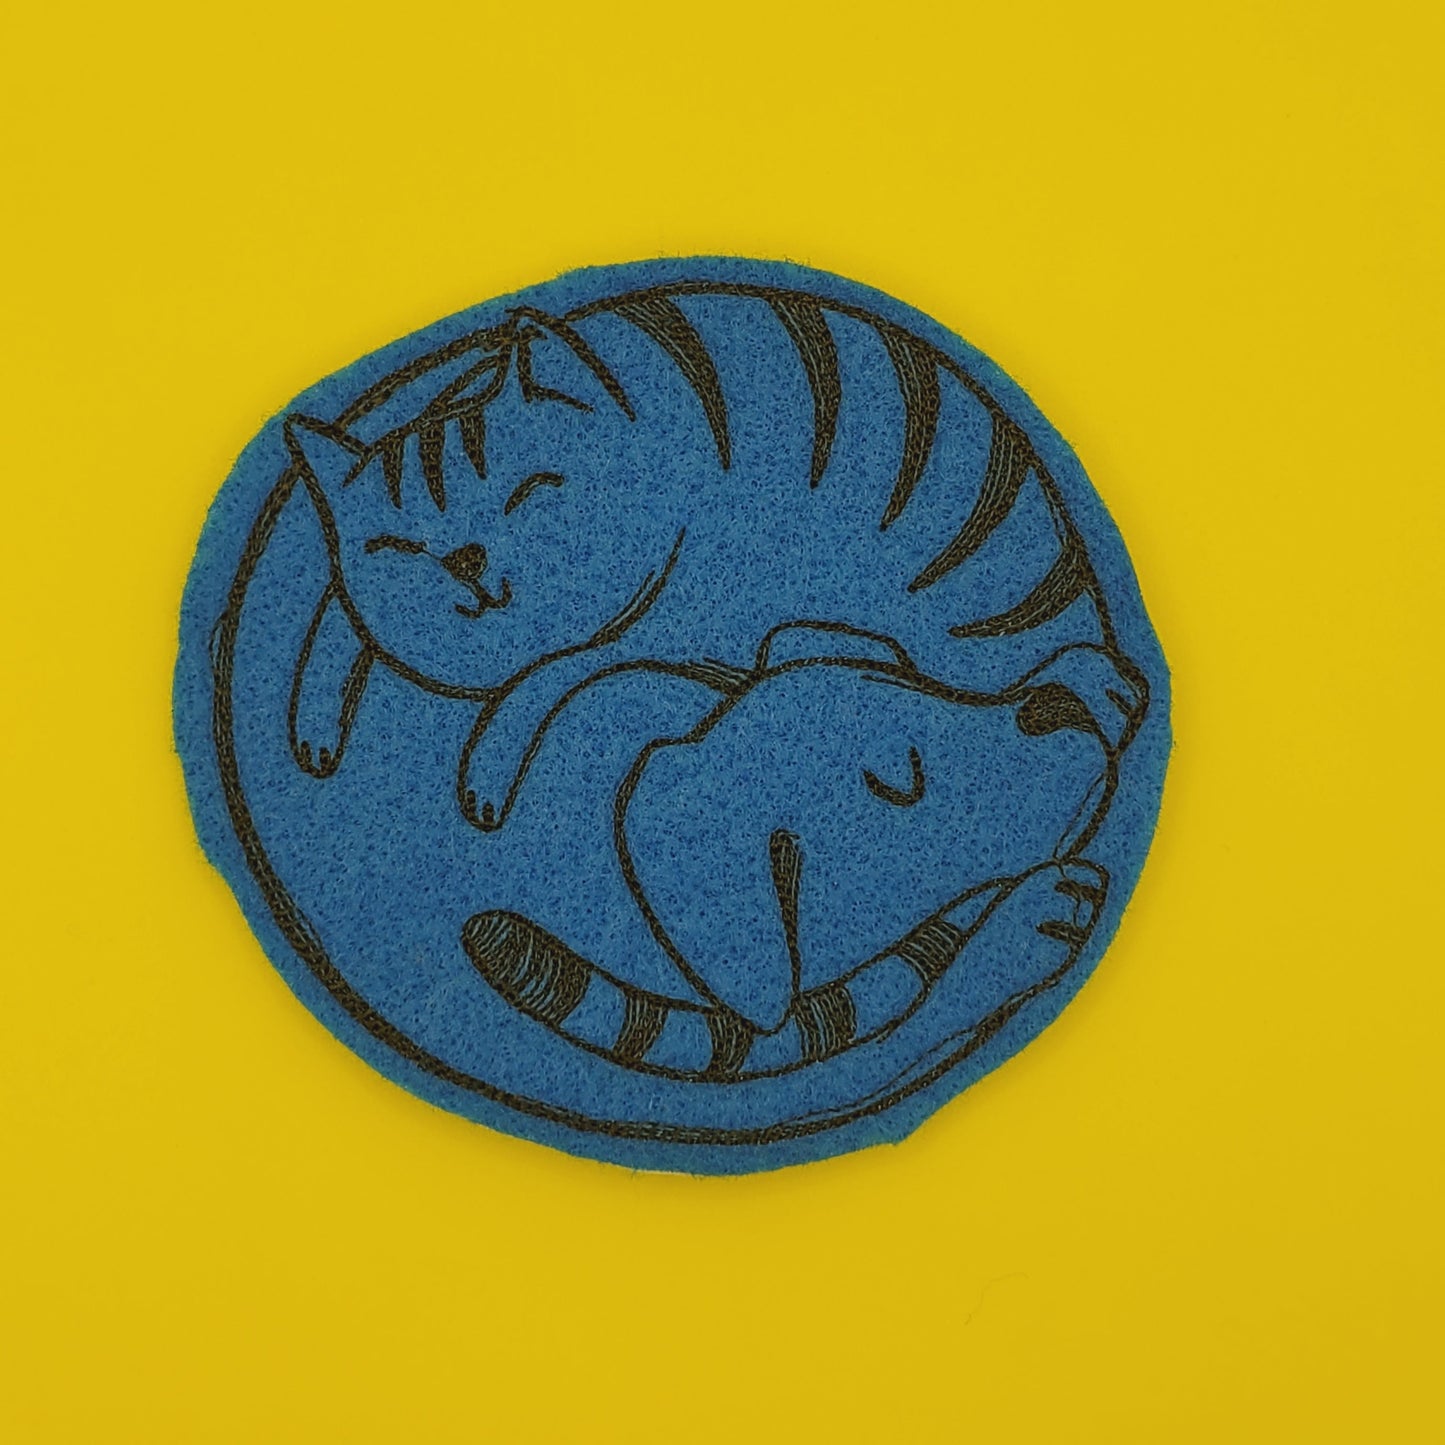 Cat and Dog Coaster stitched in black on blue felt